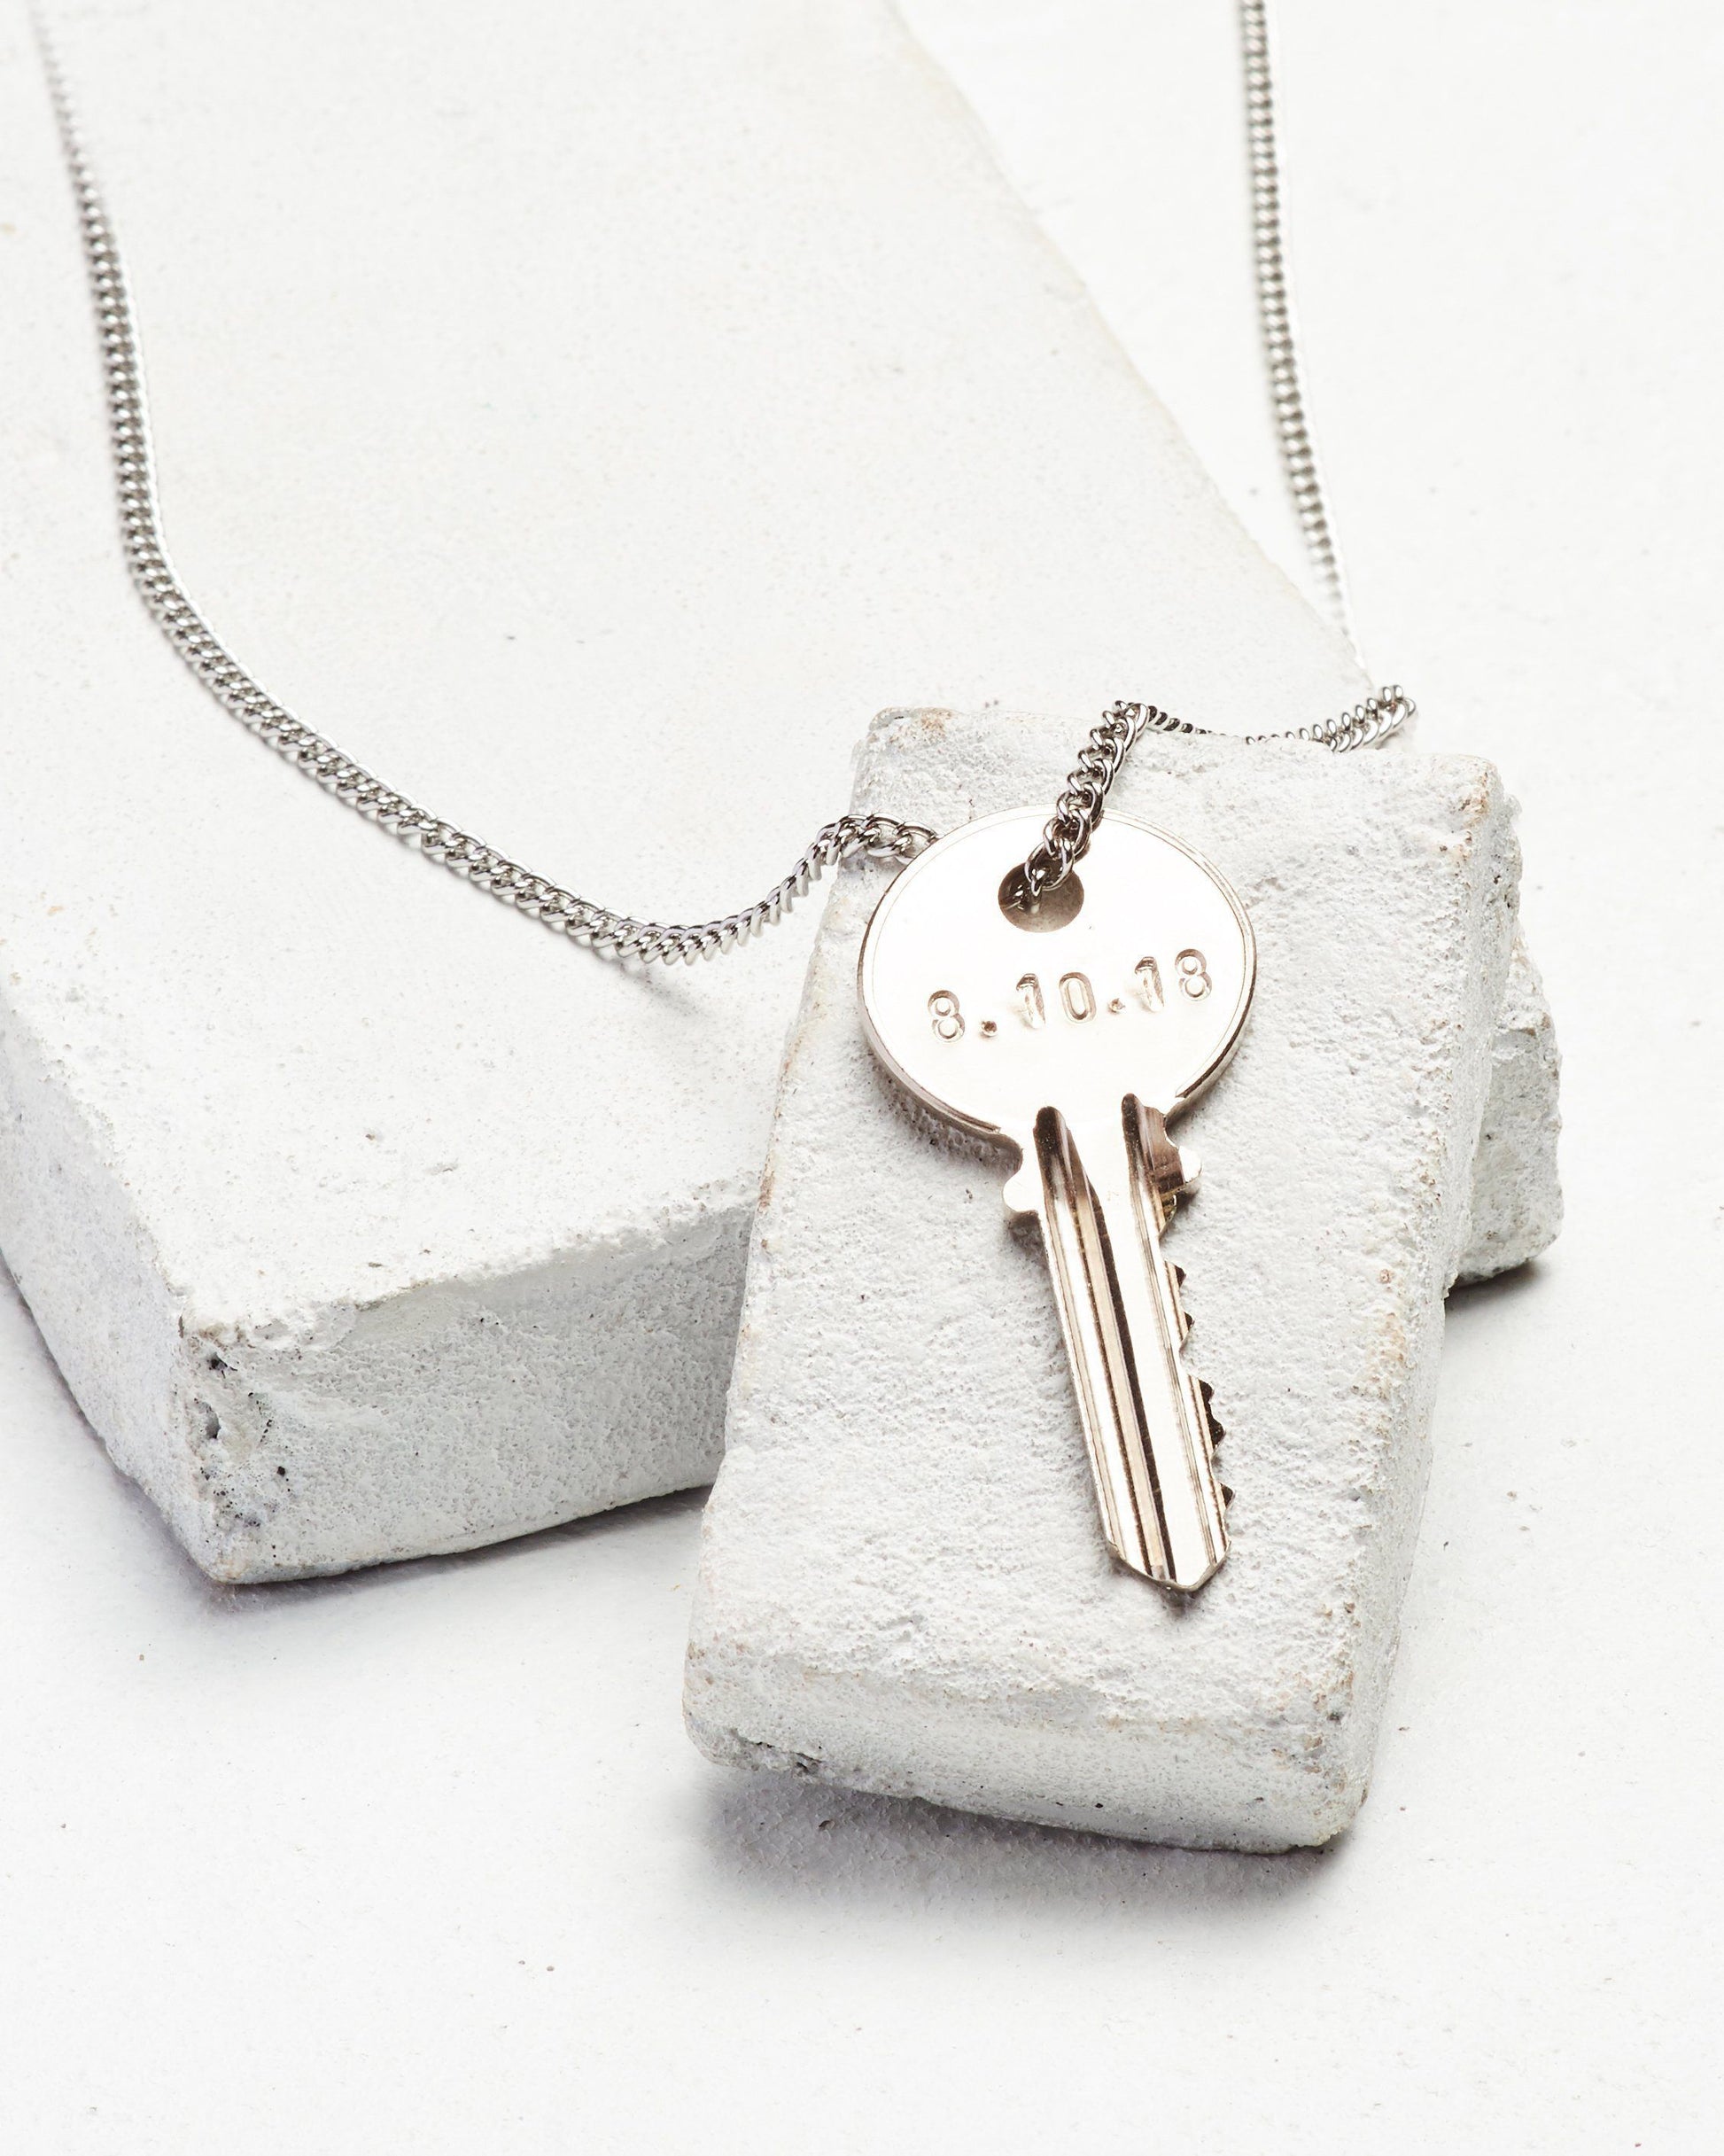 Sobriety Date Anniversary Classic Key Necklace Necklaces The Giving Keys CUSTOM Silver 